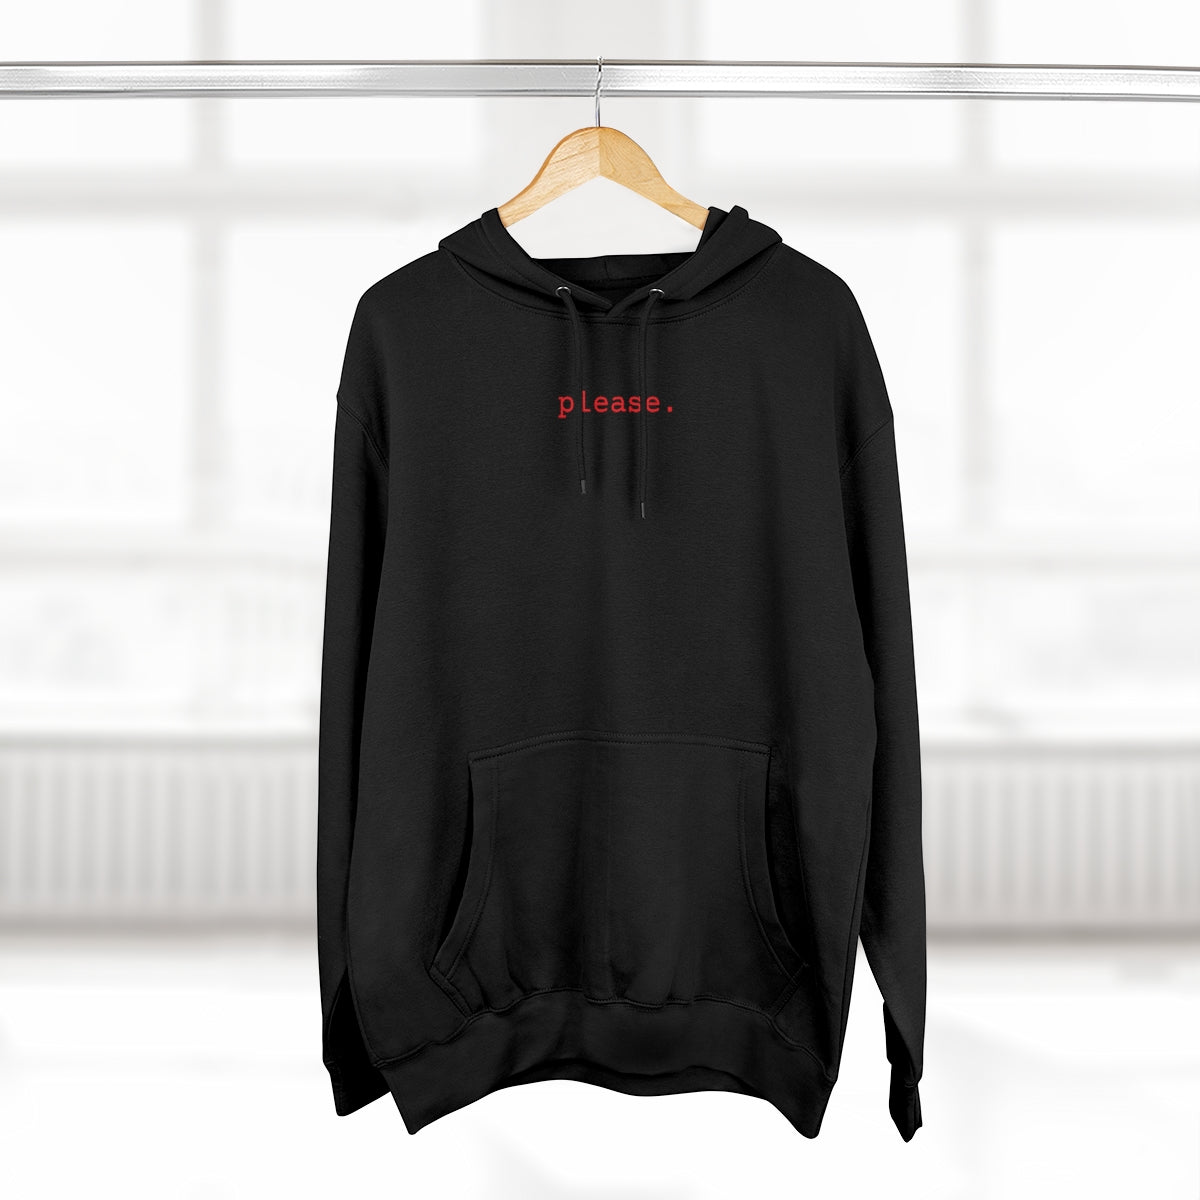 Afters Ruined My Life Hoodie (Please)